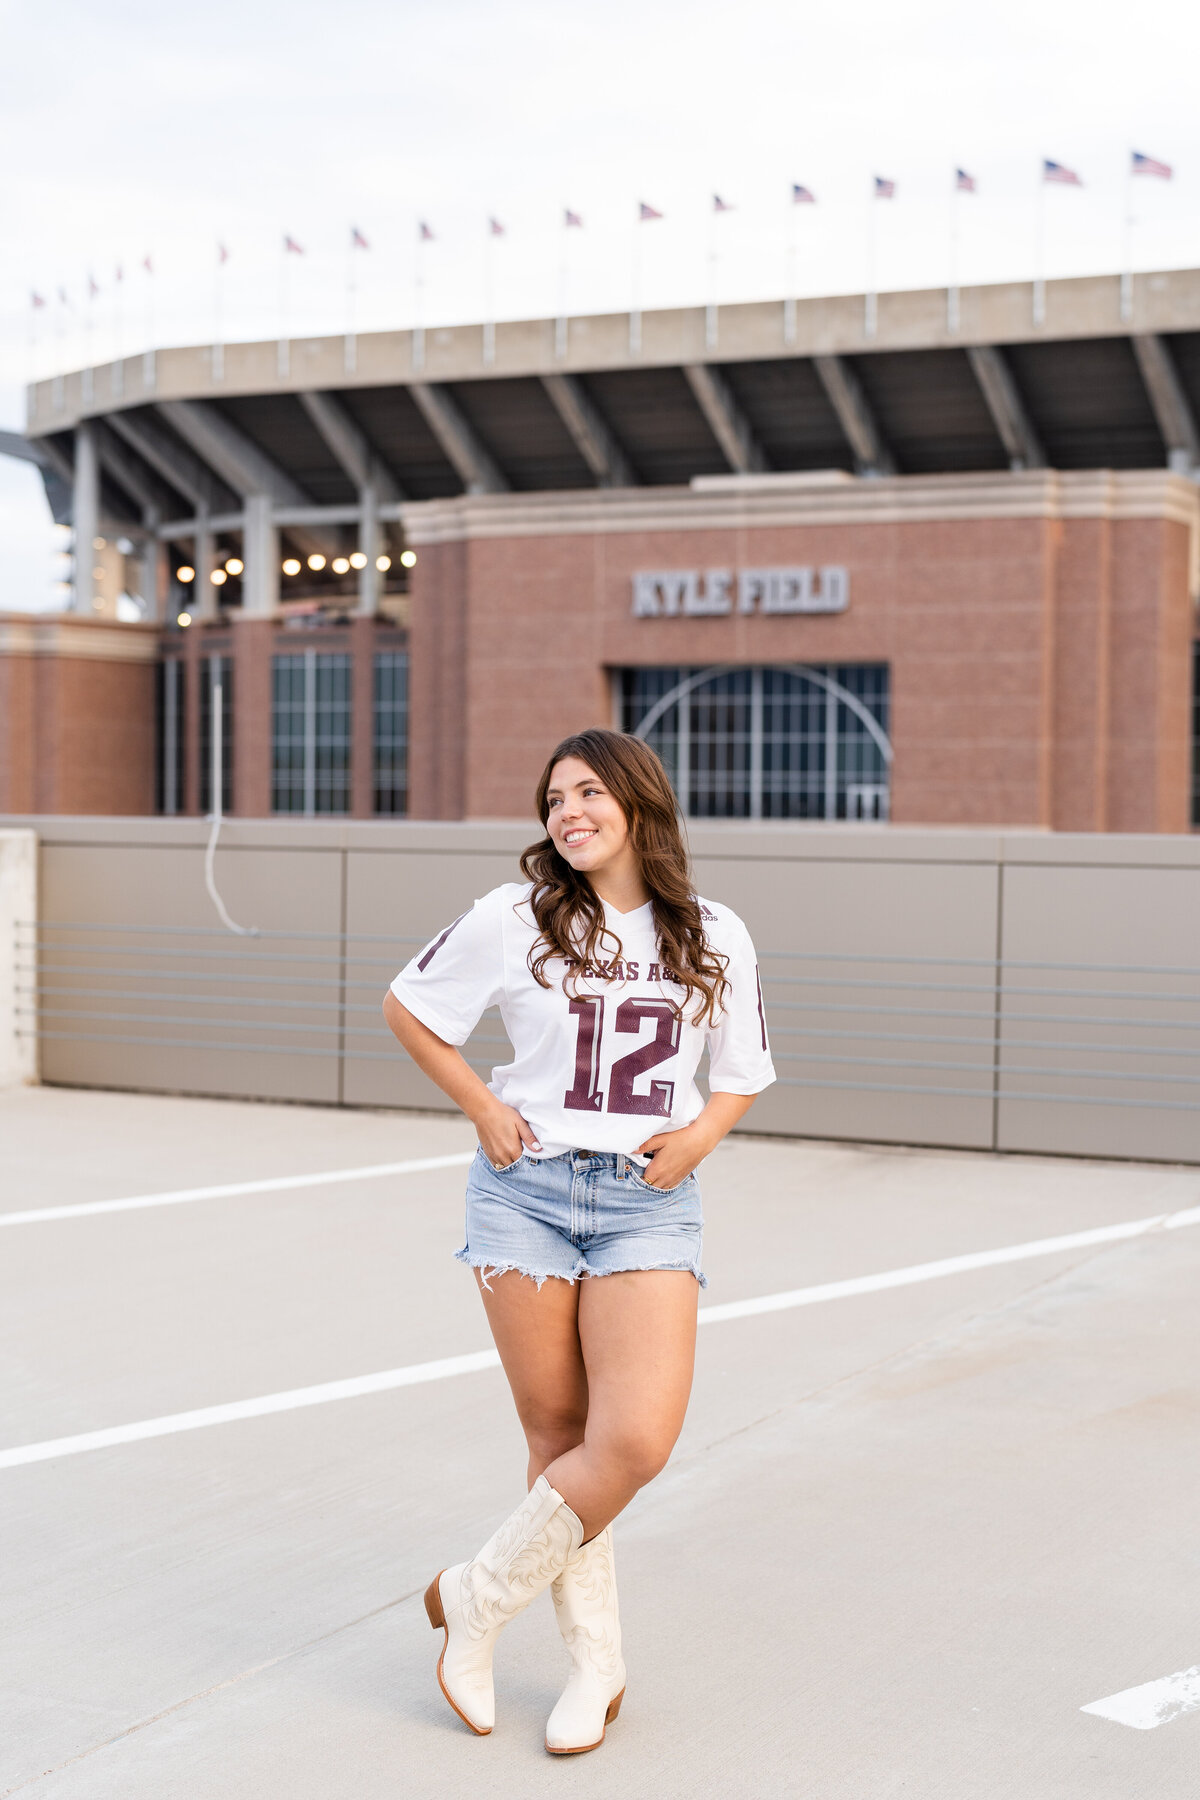 Texas A&M senior girl wearing white jersey and boots with hands in pockets and smiling away on top of a rooftop parking garage with Kyle Field in background